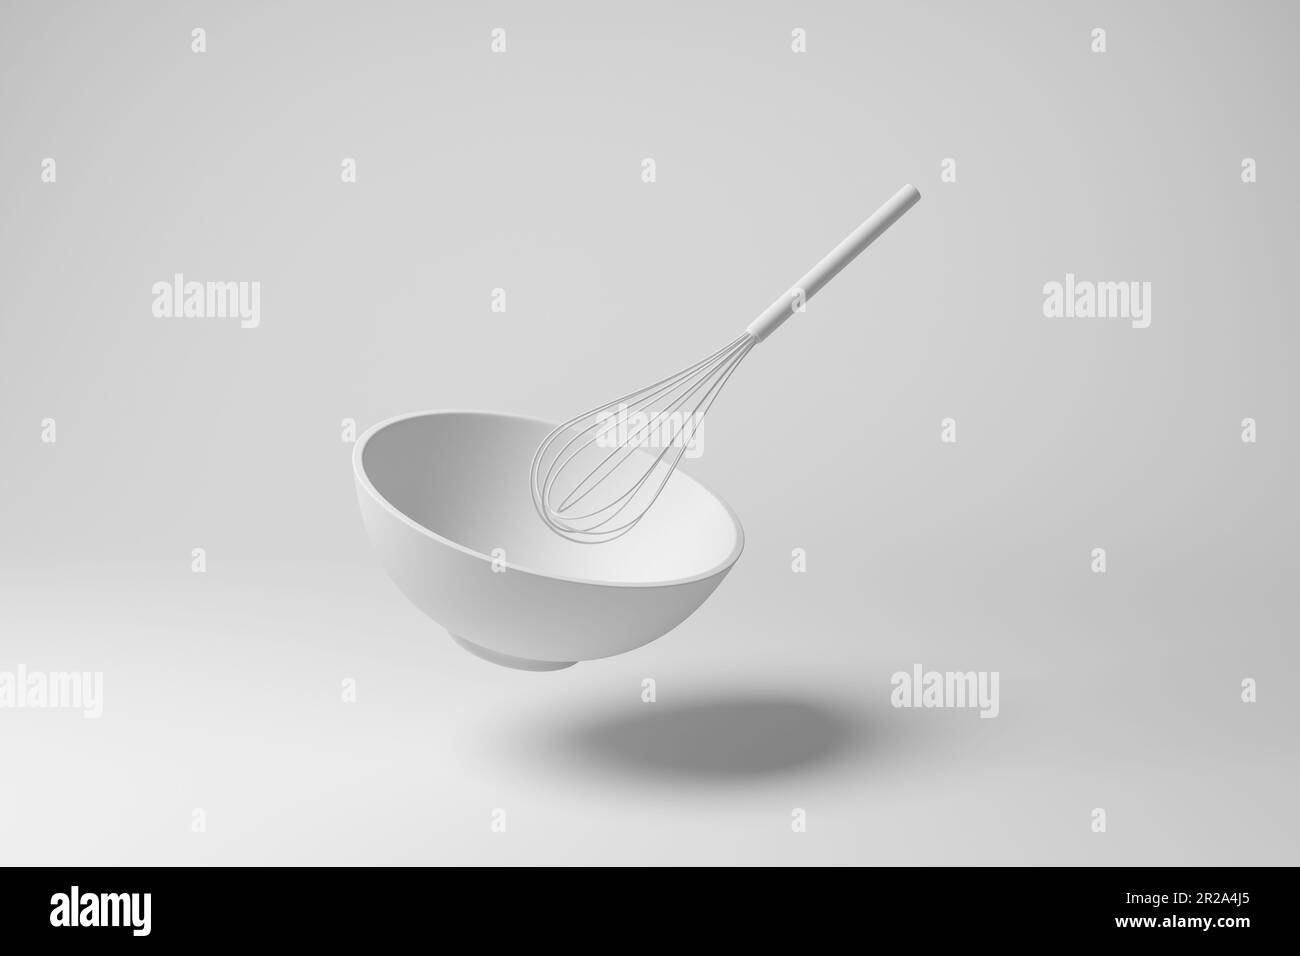 https://c8.alamy.com/comp/2R2A4J5/white-balloon-whisk-and-bowl-floating-in-mid-air-with-shadow-on-white-background-in-monochrome-concept-of-cookery-culinary-and-bakery-2R2A4J5.jpg